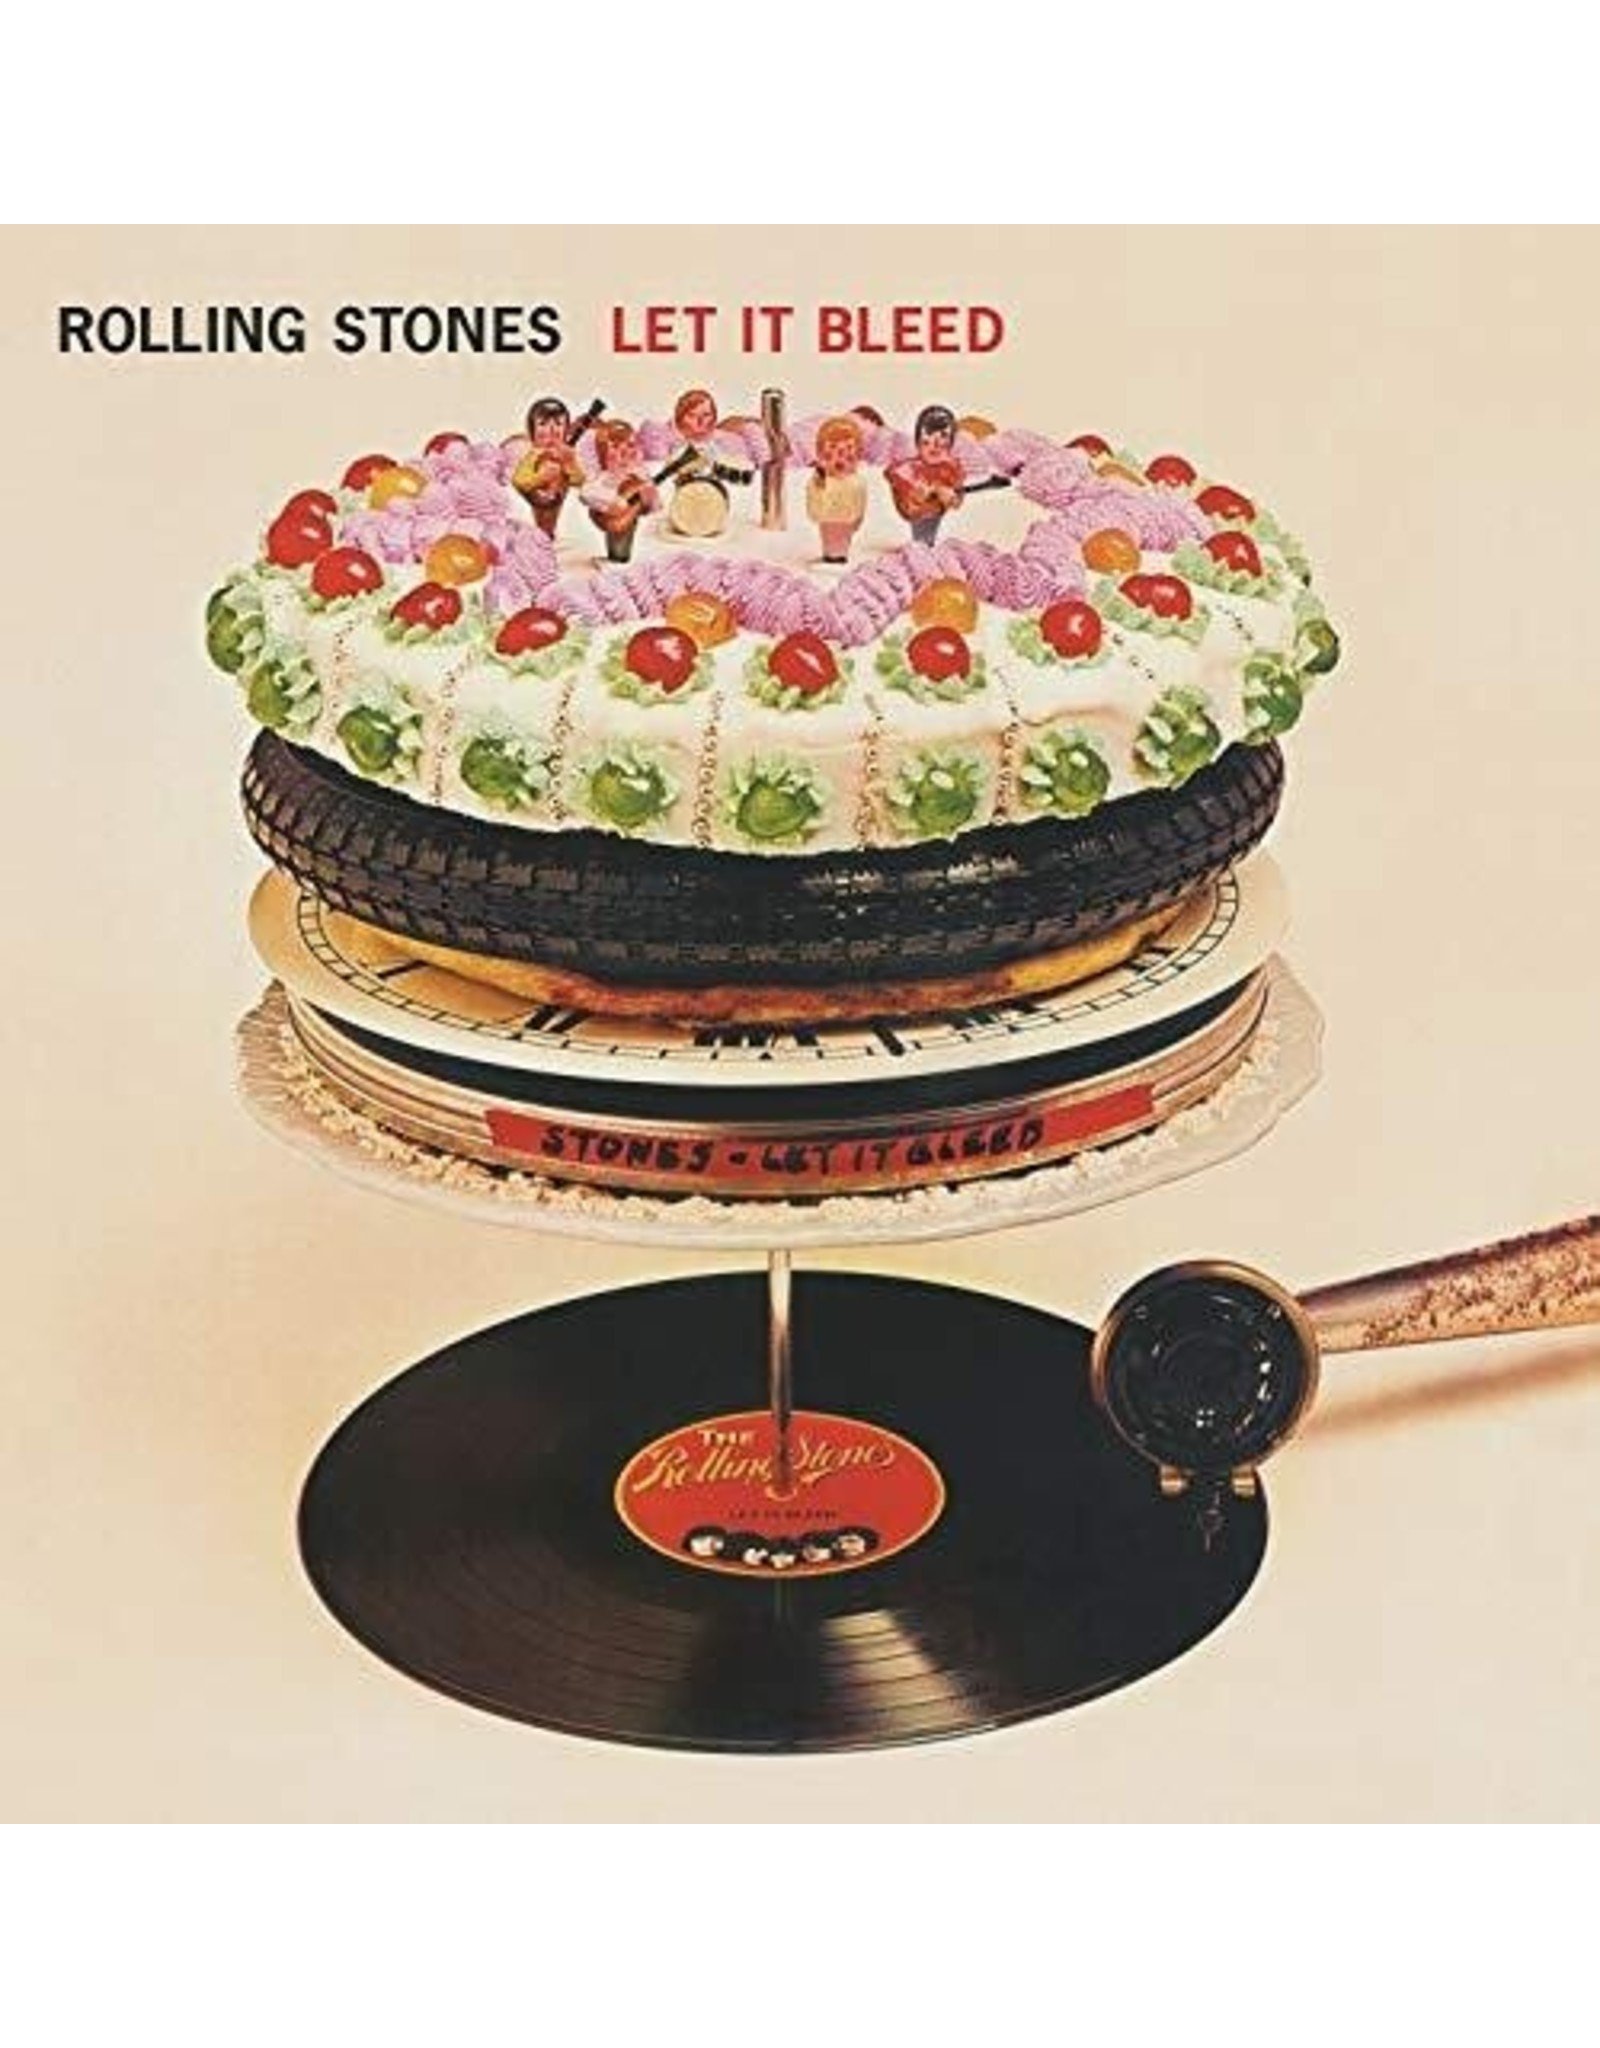 New Vinyl Rolling Stones - Let It Bleed (50th Anniversary Edition) LP